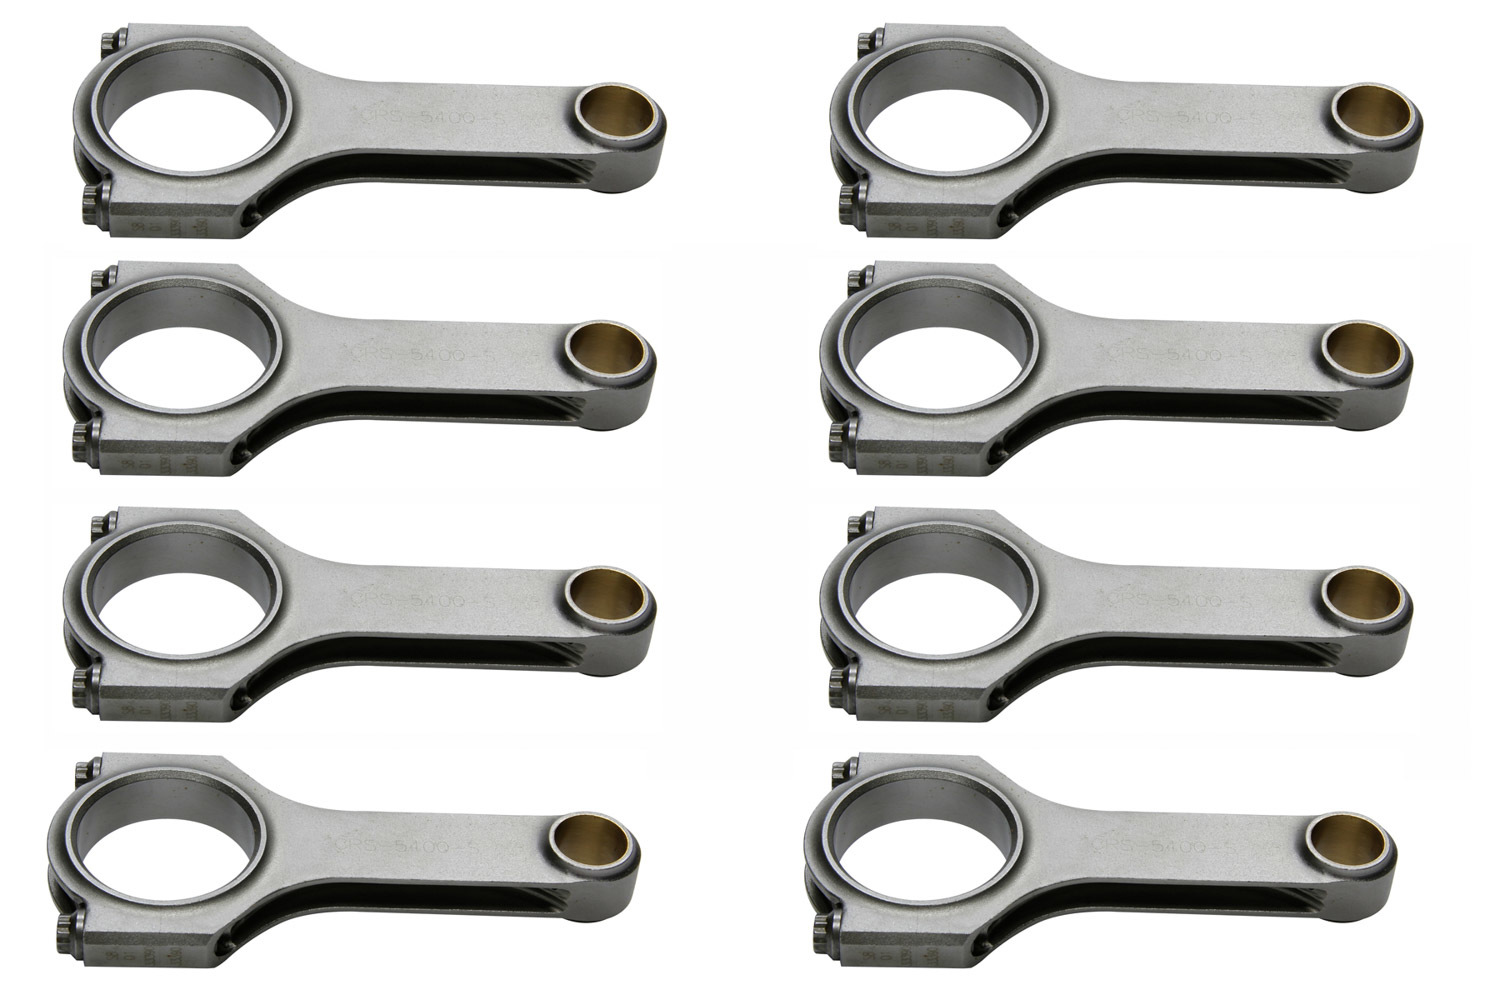 Eagle CRS5400S3D - Connecting Rod, H Beam, 5.400 in Long, Bushed, 7/16 in Cap Screws, Forged Steel, Small Block Ford, Set of 8